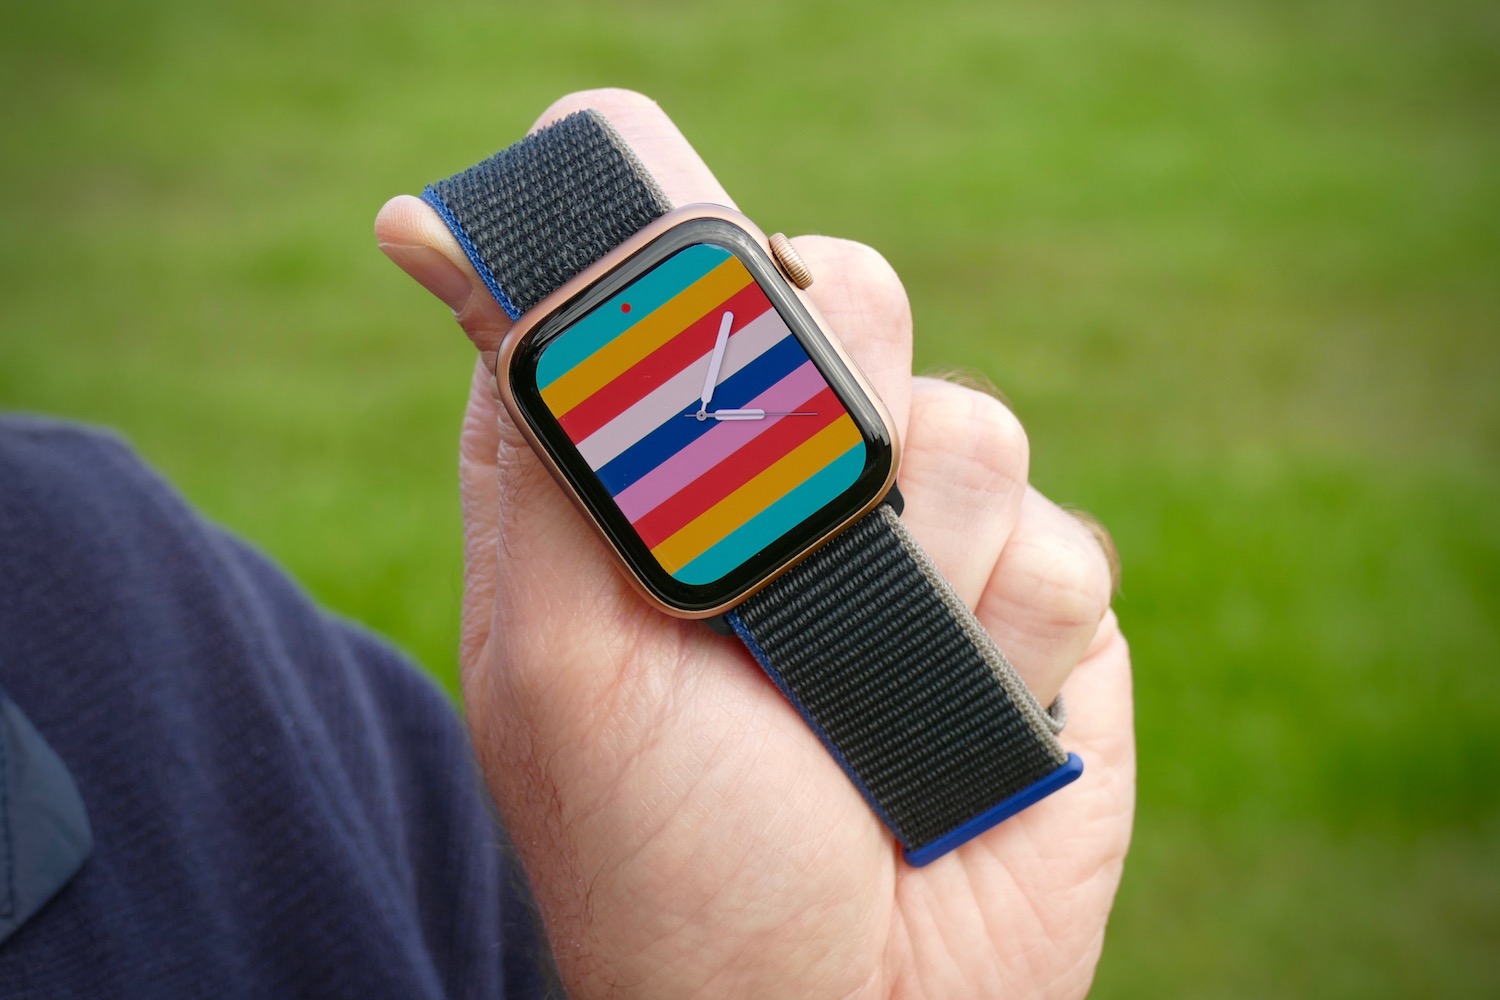 The Stripes face of the Apple Watch SE.